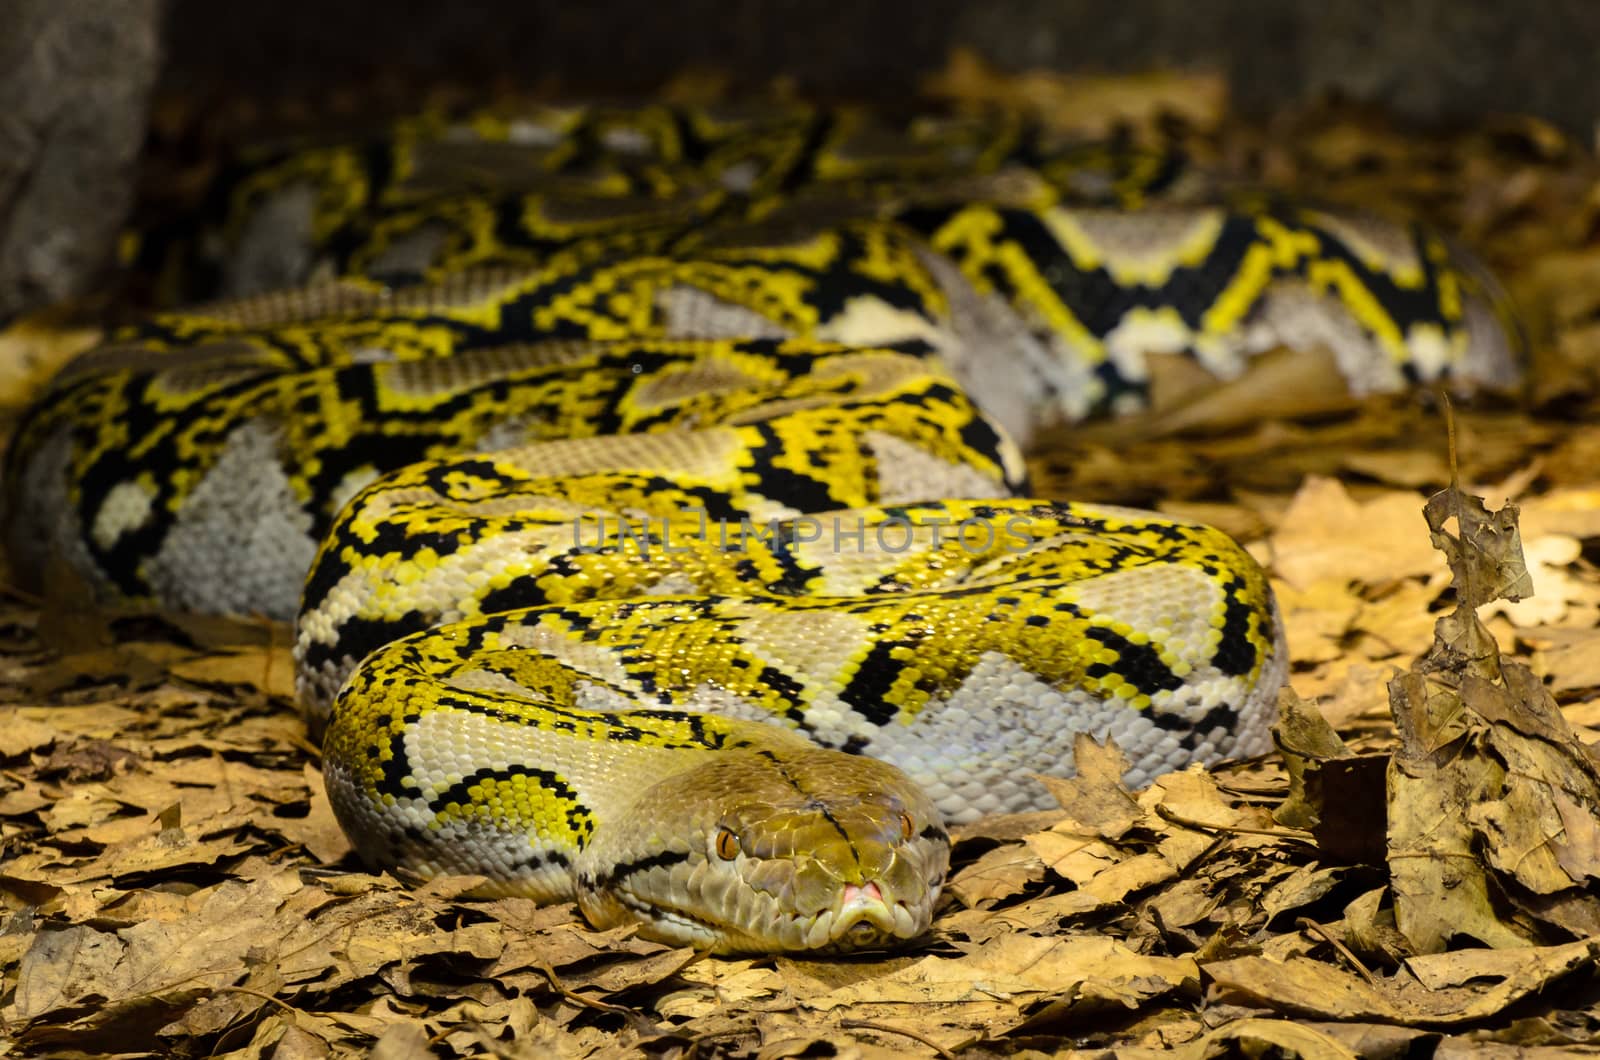 Beautiful large snake with great texture and color. This was taken at a zoo in Holland.